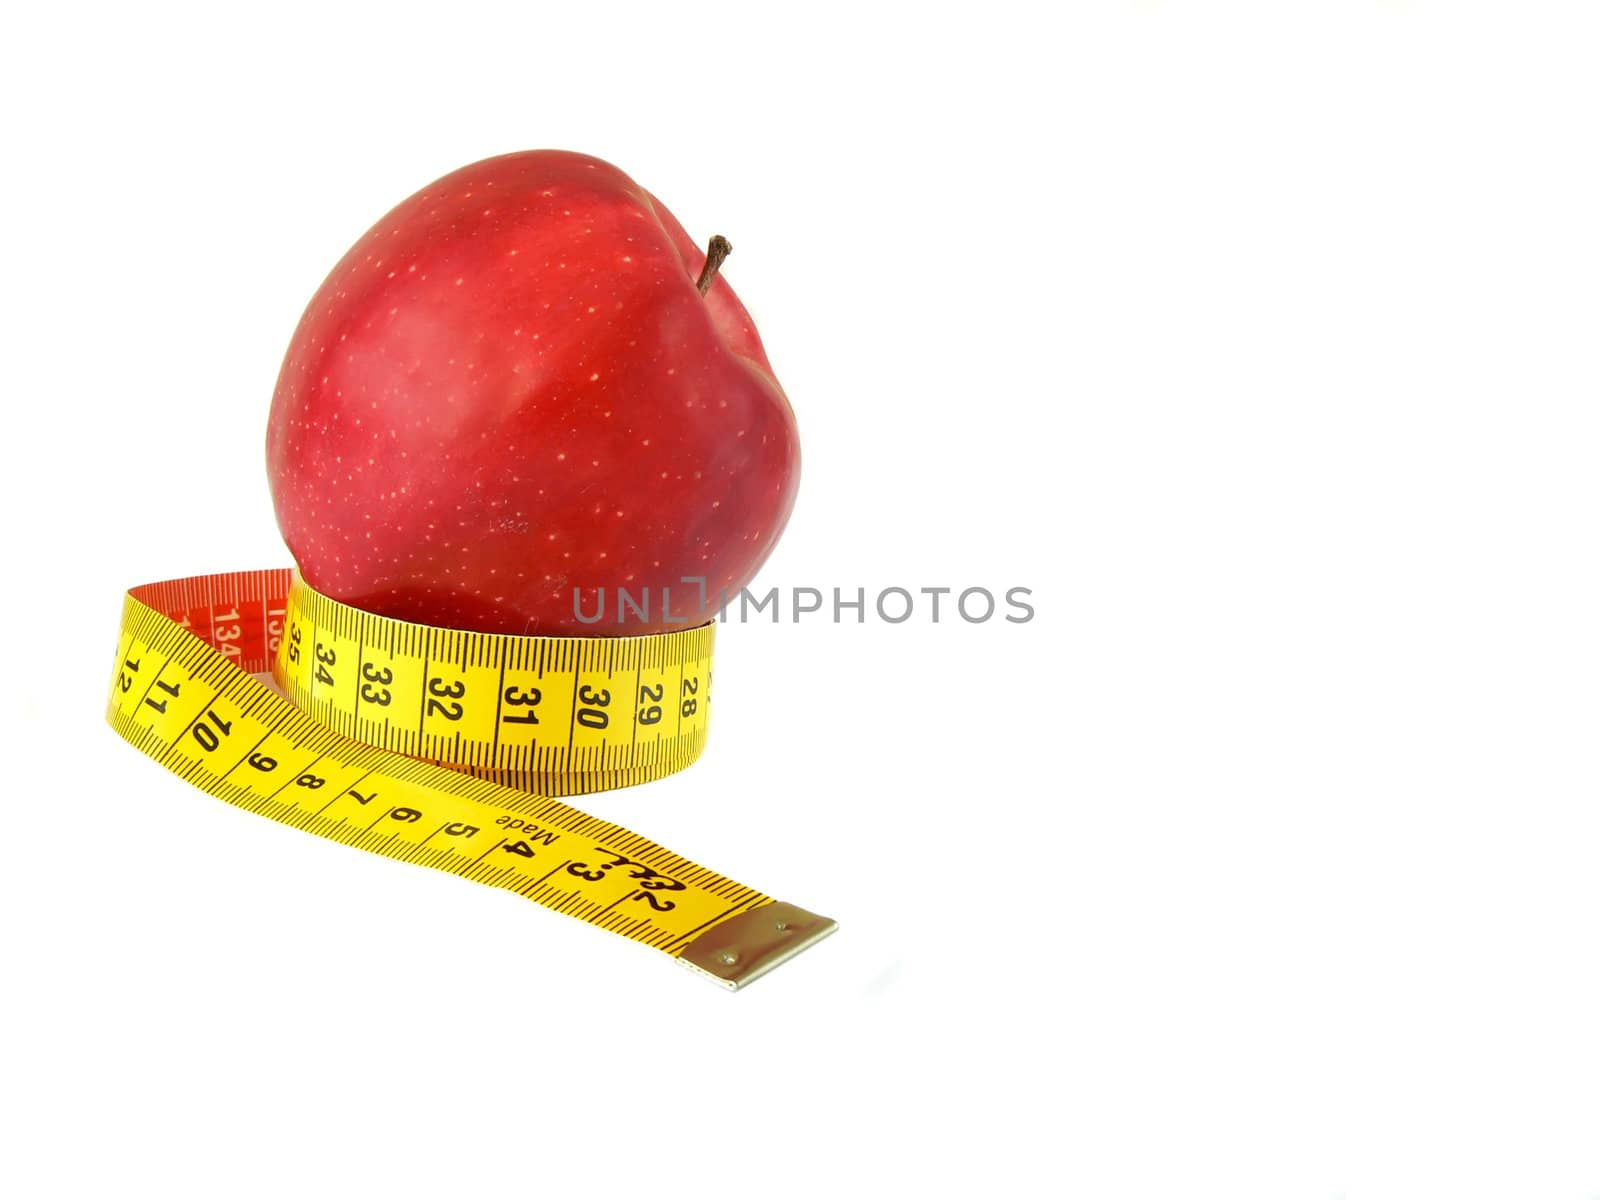 Red apple (malus) and measuring tape isolated on white